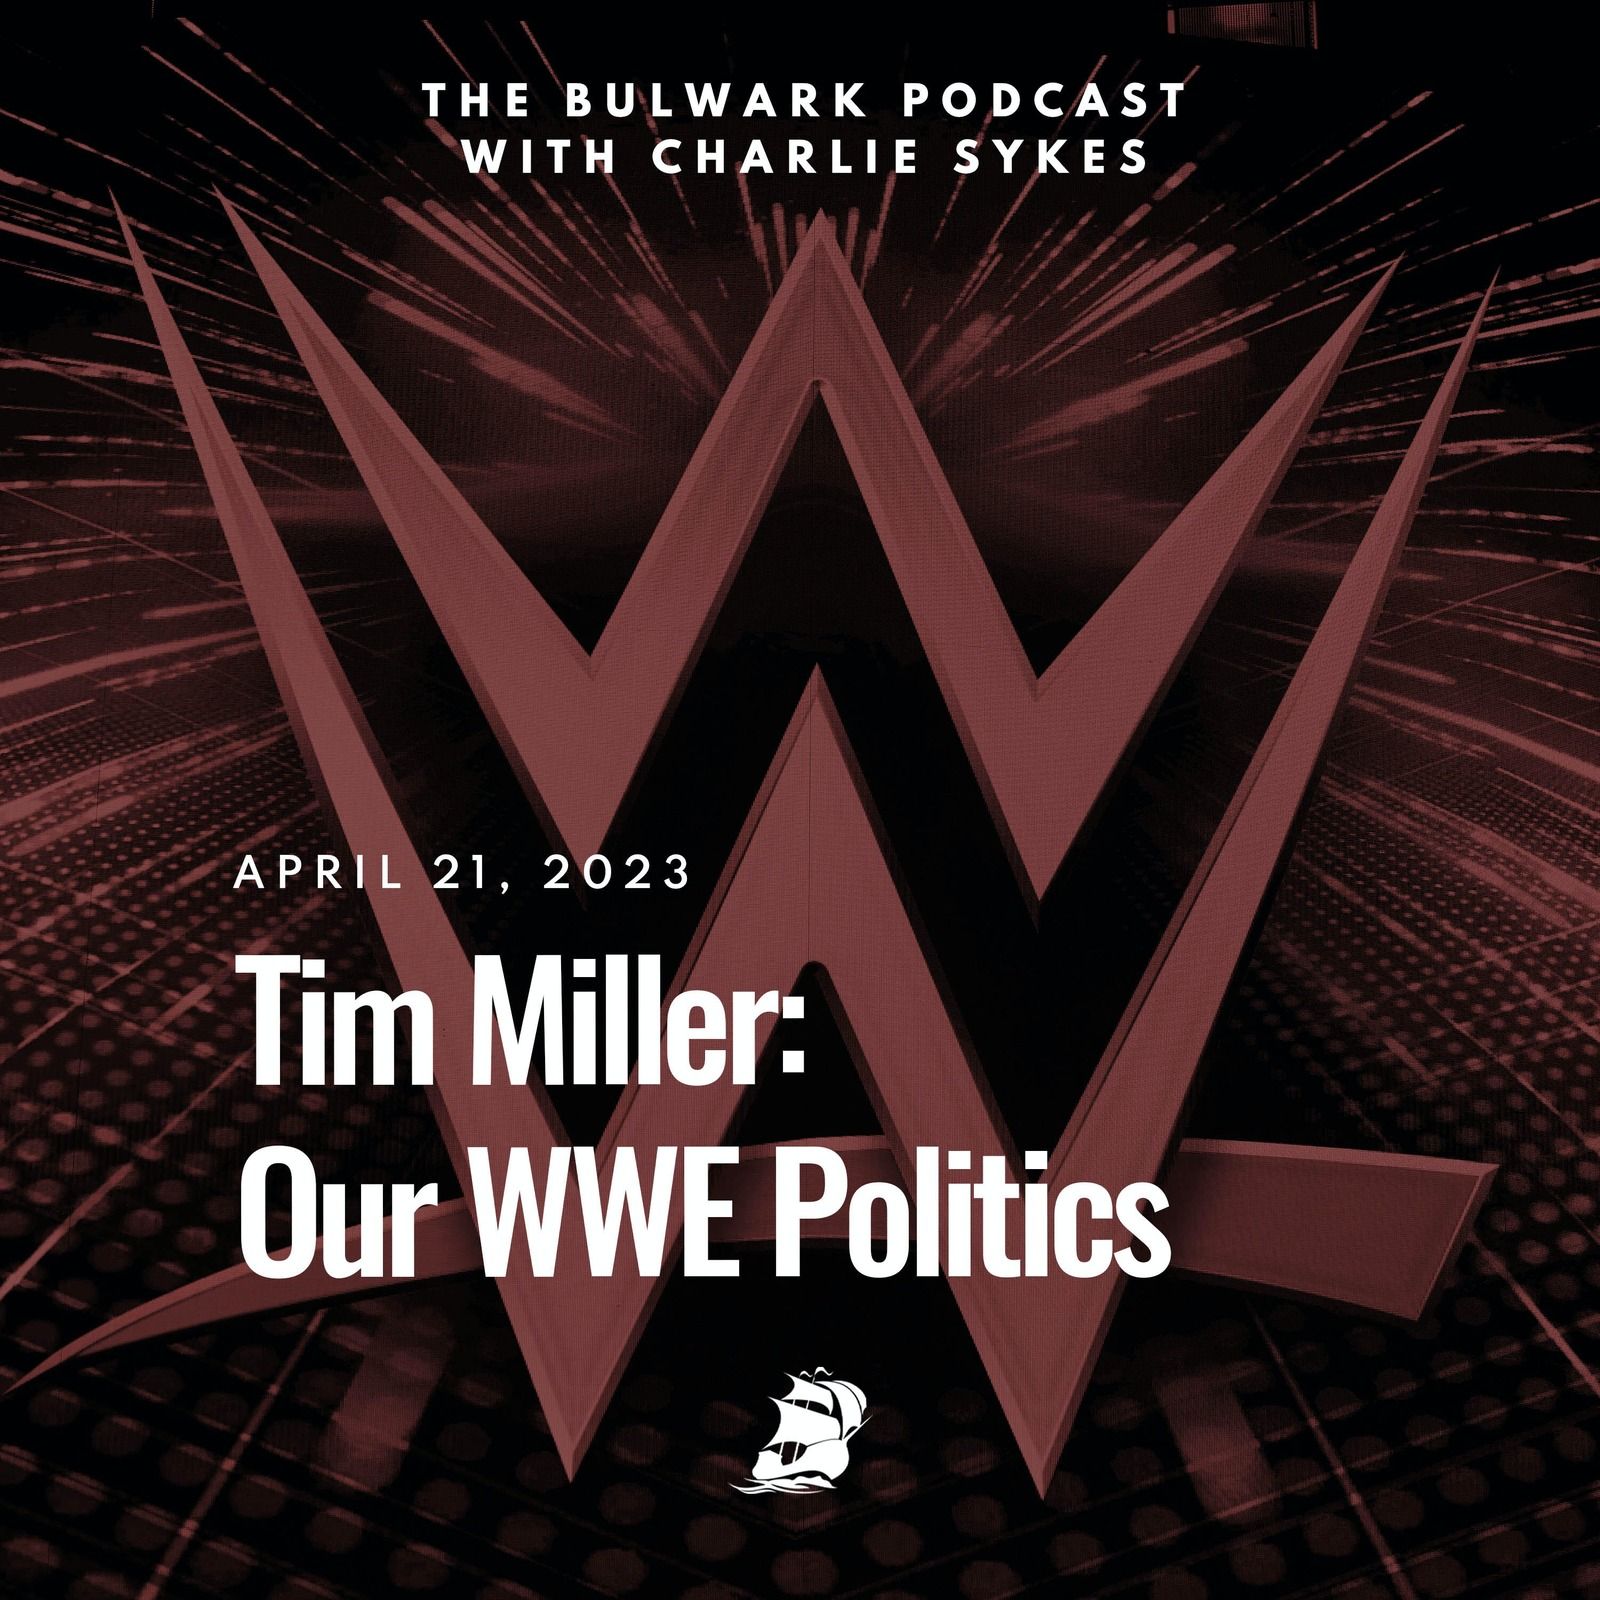 Tim Miller: Our WWE Politics by The Bulwark Podcast